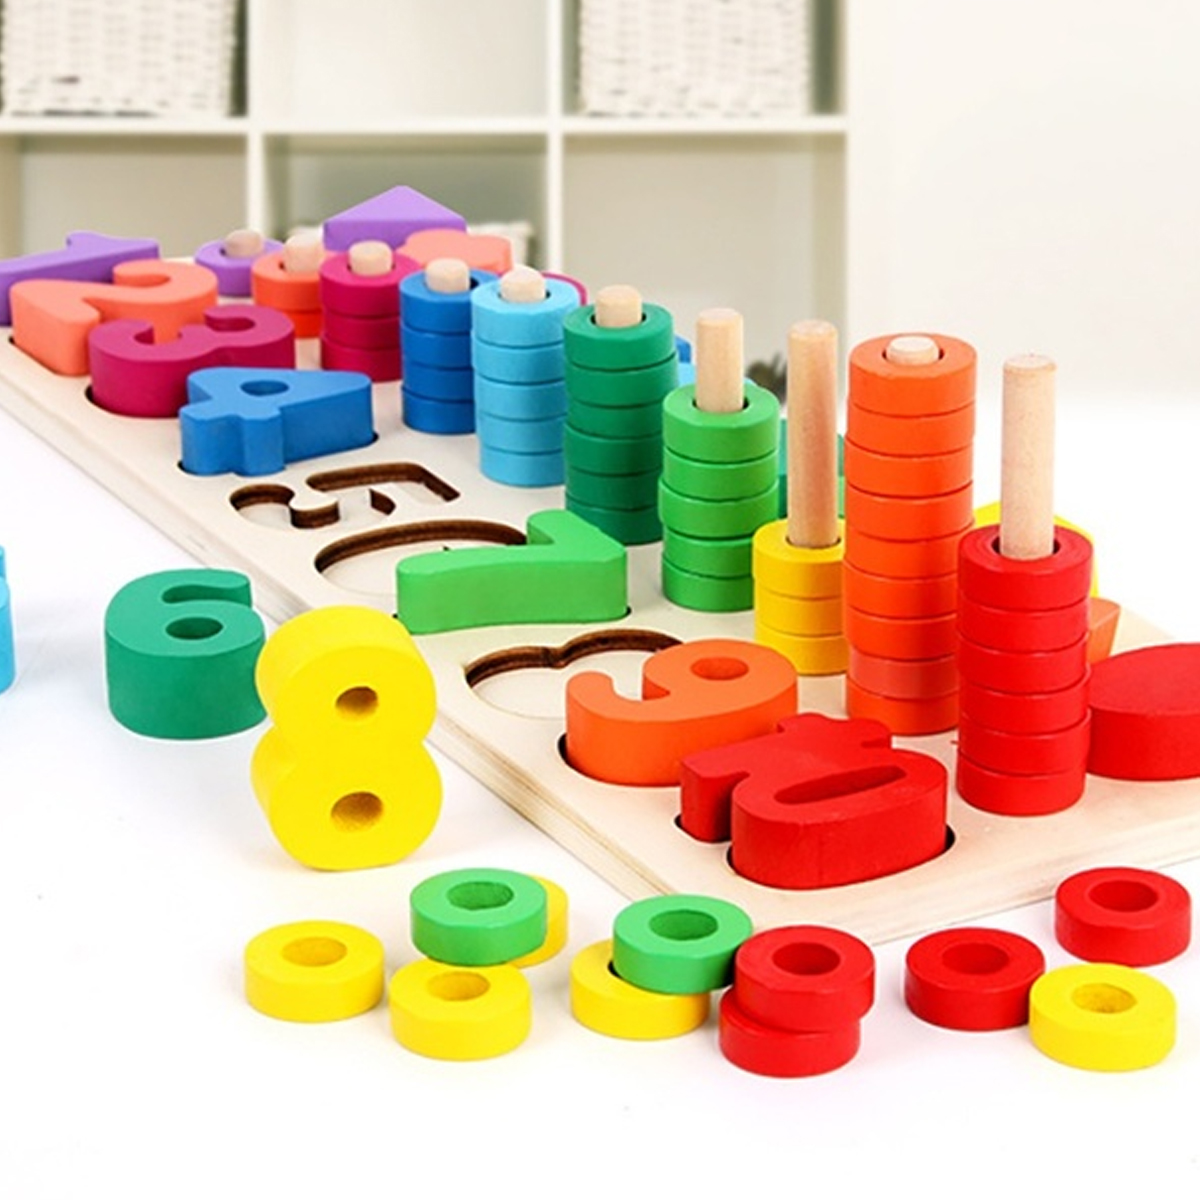 Wooden-Math-Toy-Board-Montessori-Counting-Board-Preschool-Learning-Toys-for-Children-Gifts-1629382-5